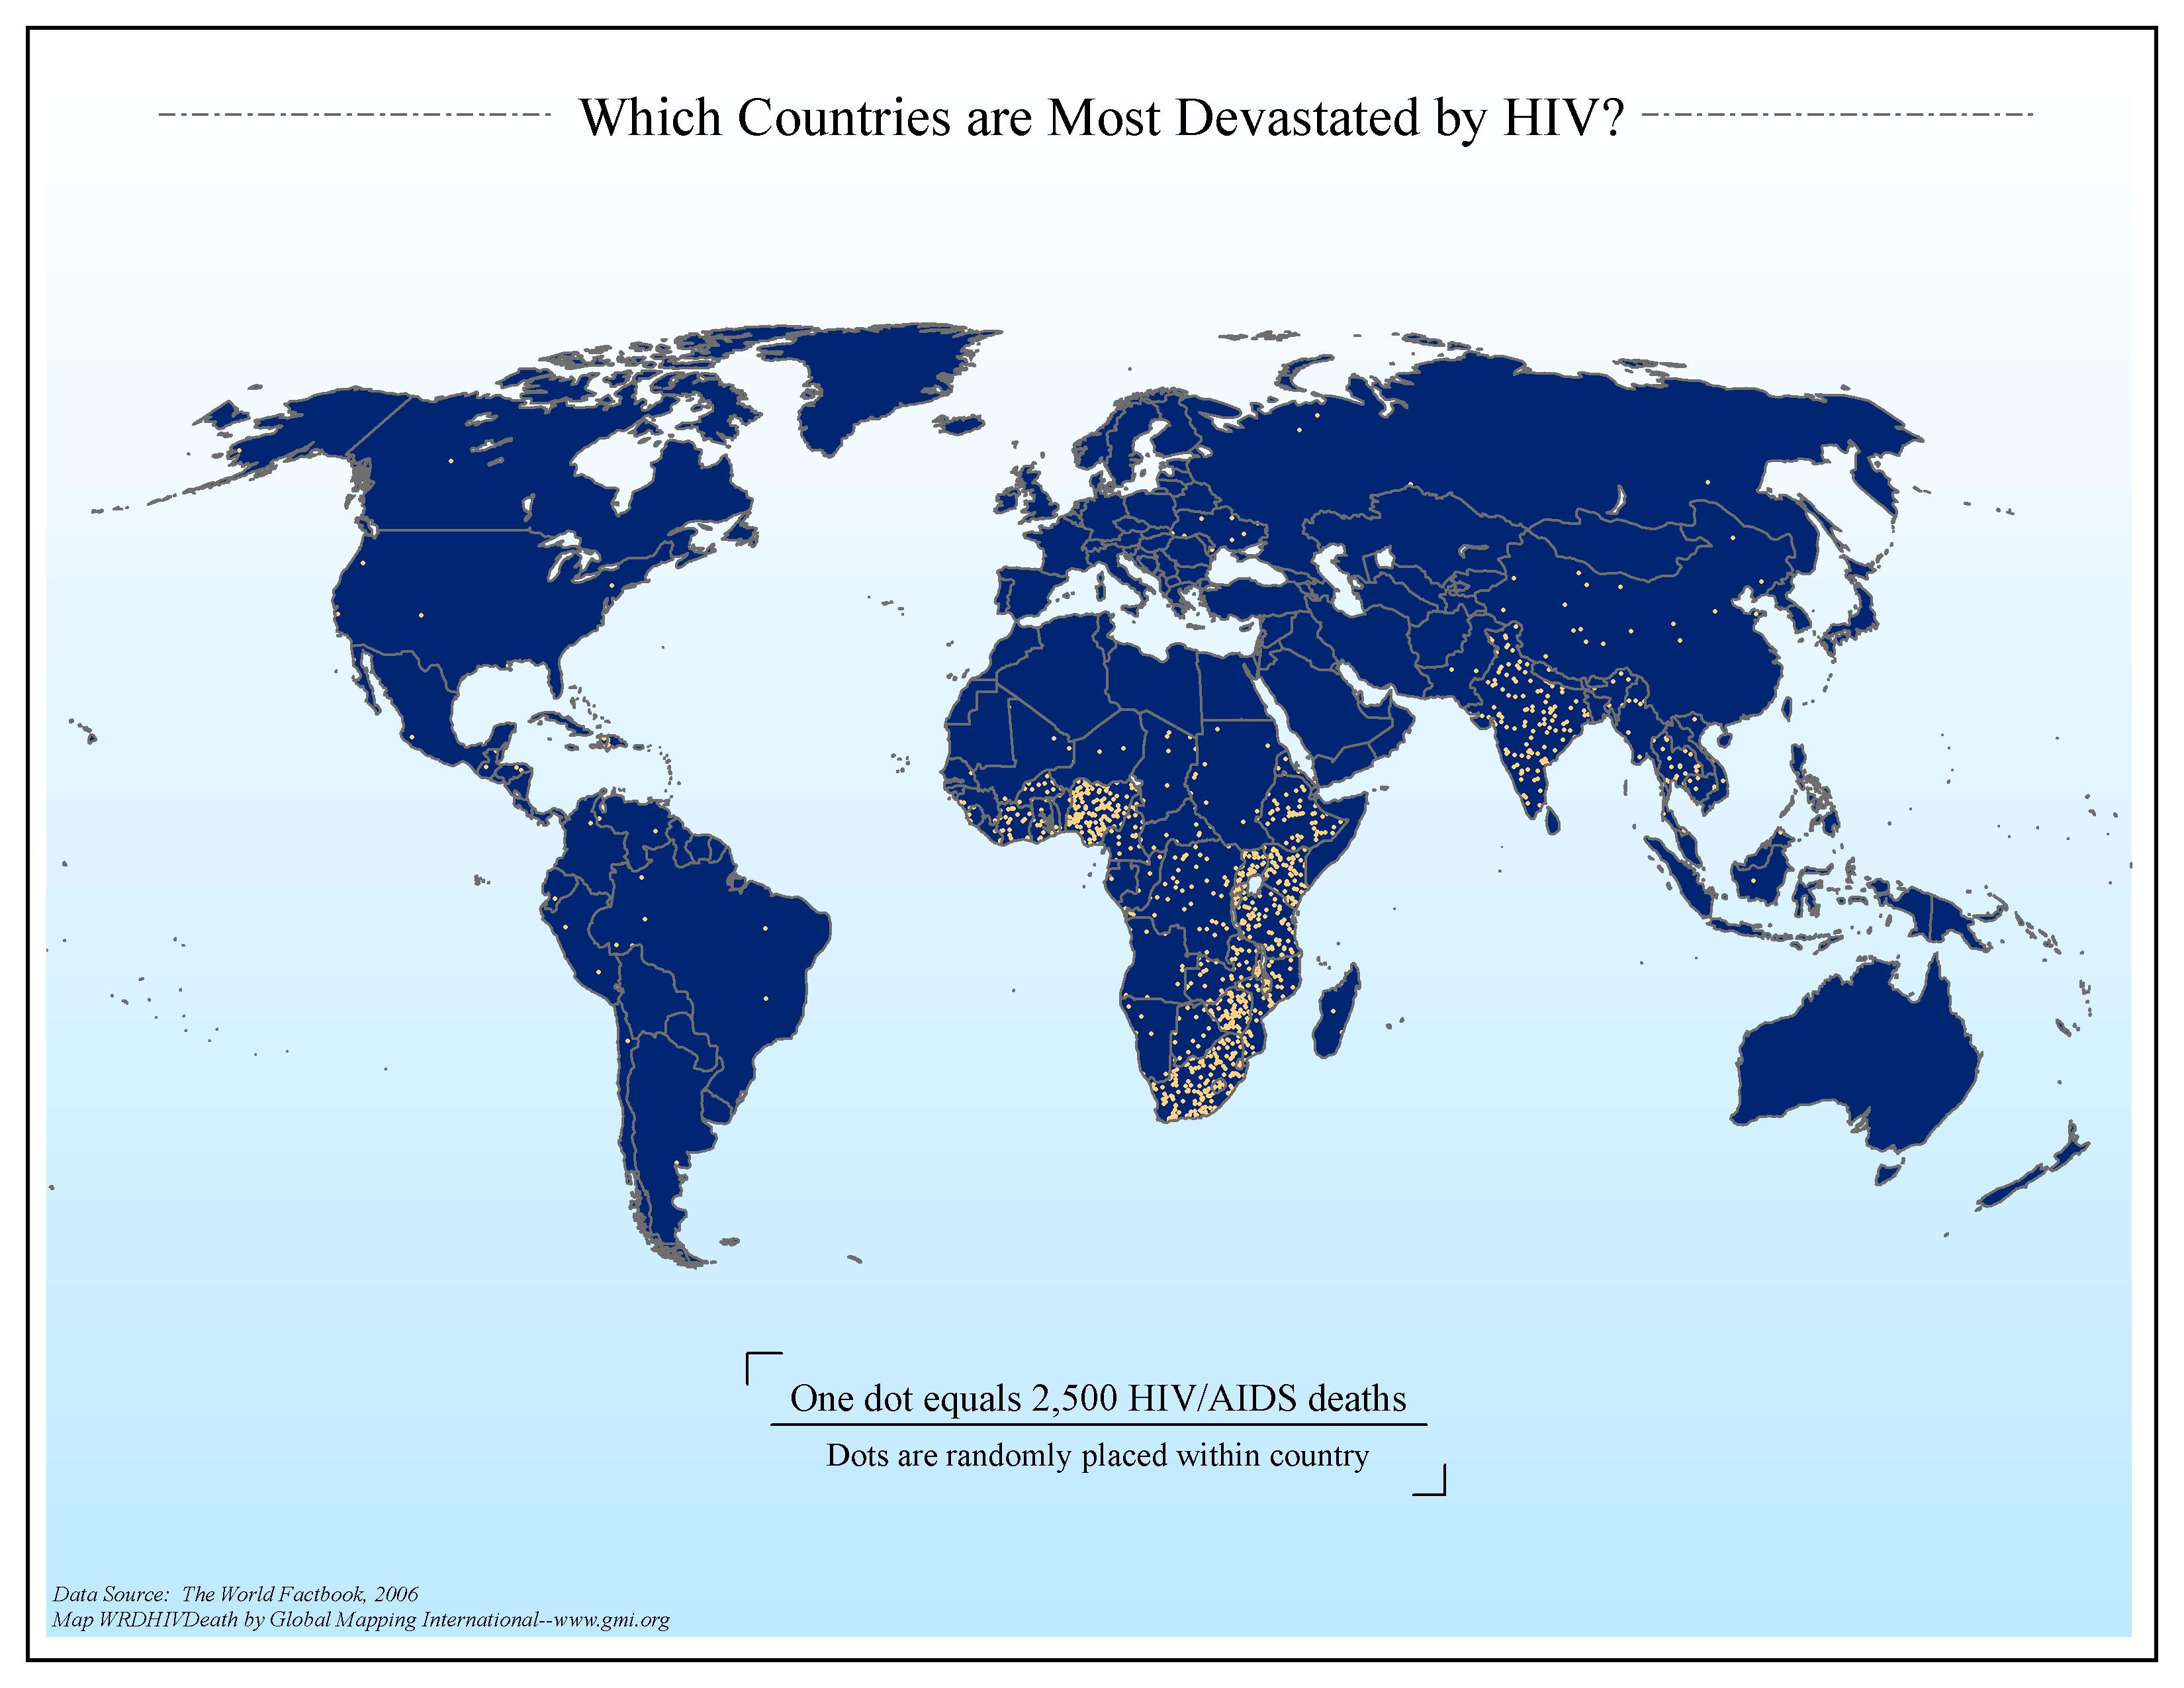 Which Countries are Most Devastated by HIV?